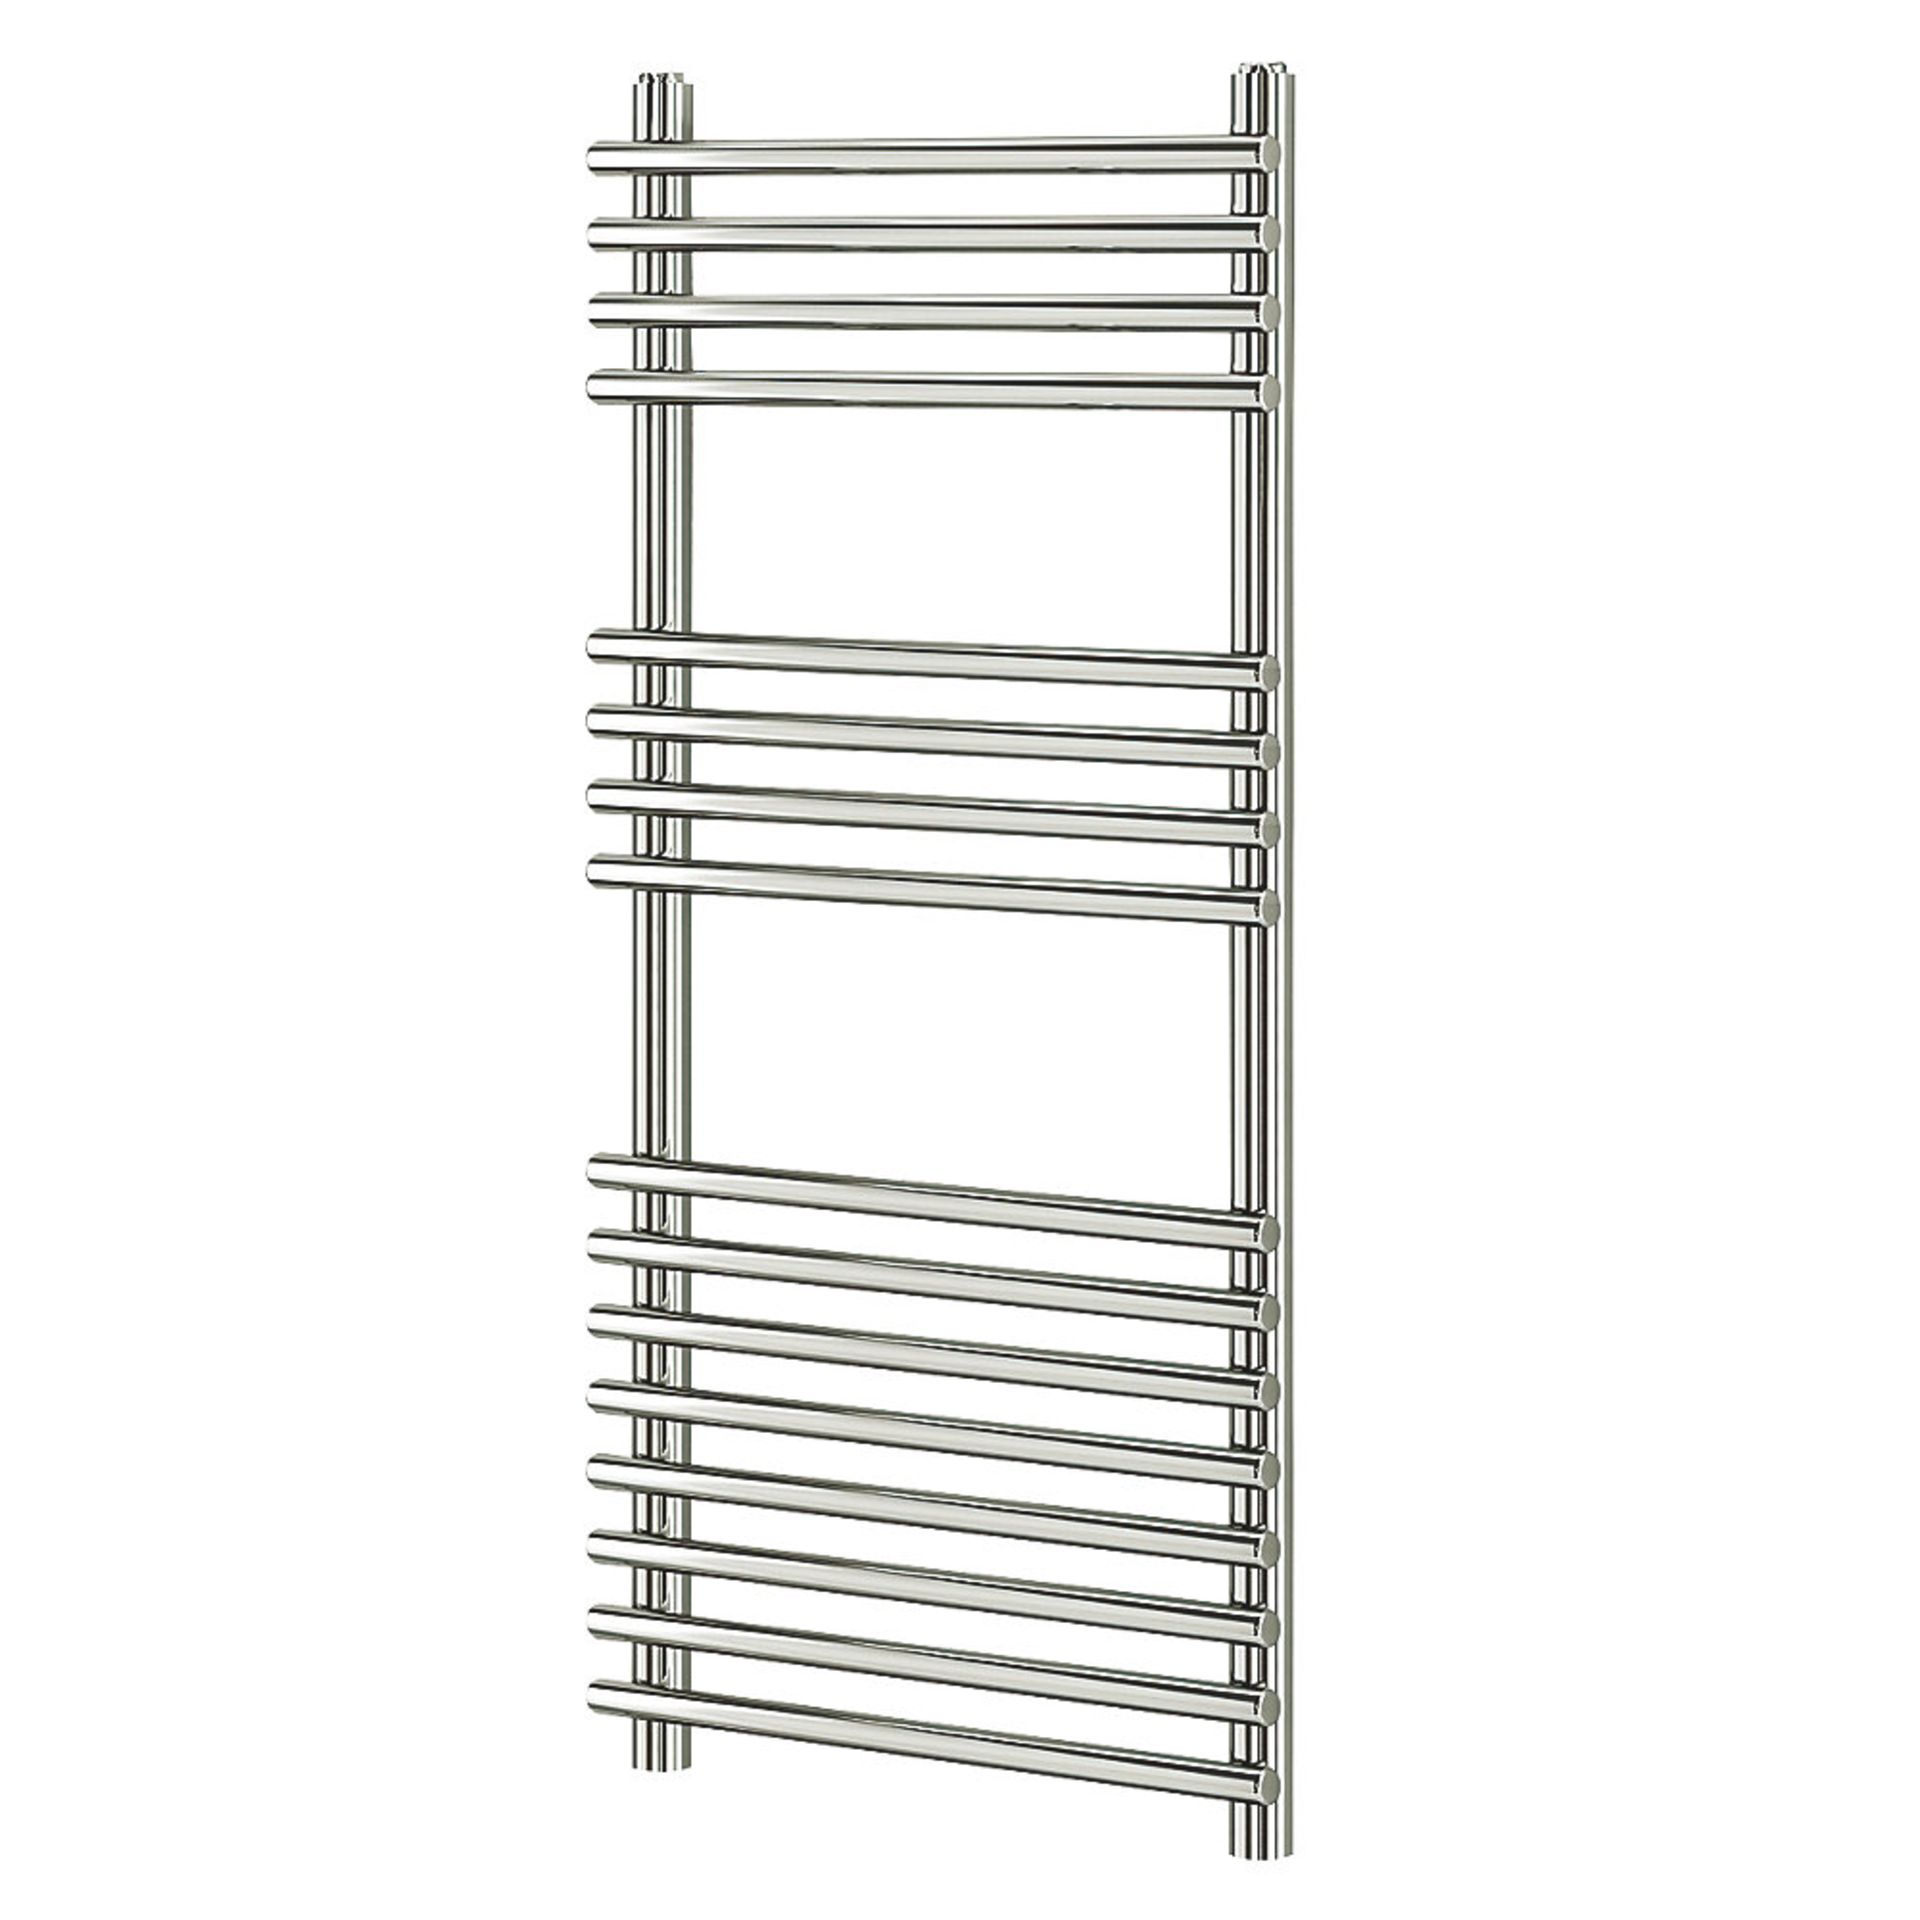 (EY158) 900 x 450mm Chrome Towel Warmer. Mild steel construction with a chrome-plated finish. Flat - Image 2 of 3